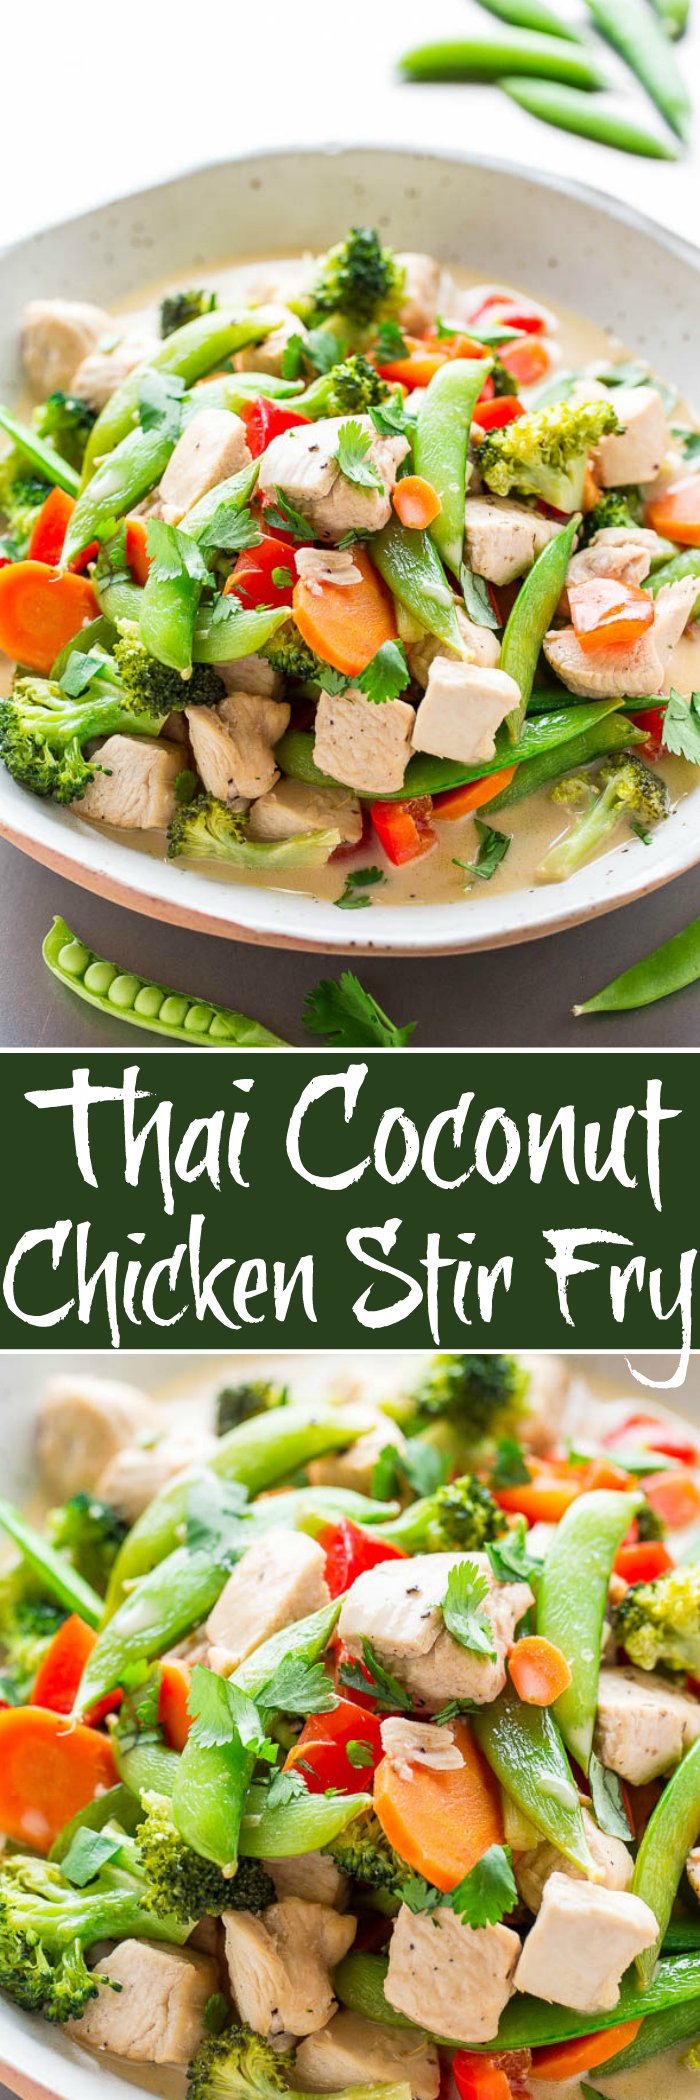 Thai Chicken Stir Fry — Chicken, sugar snap peas, bell peppers, and carrots simmered in a rich coconut milk broth that's irresistible!! Layers of flavor, EASY, ready in 20 MINUTES, and HEALTHY!!